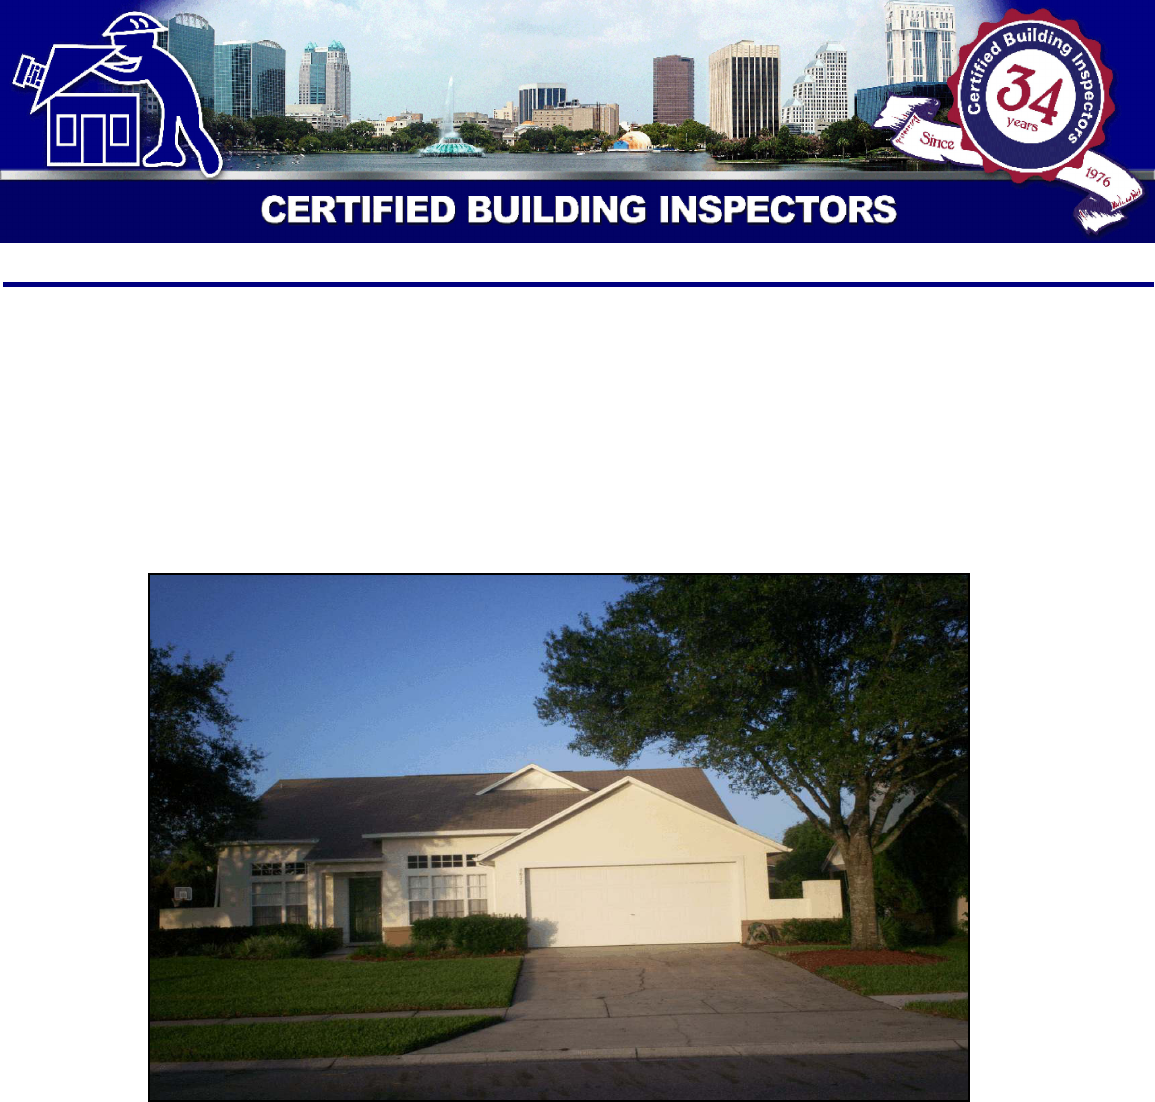 Home Inspection Report Sample 2